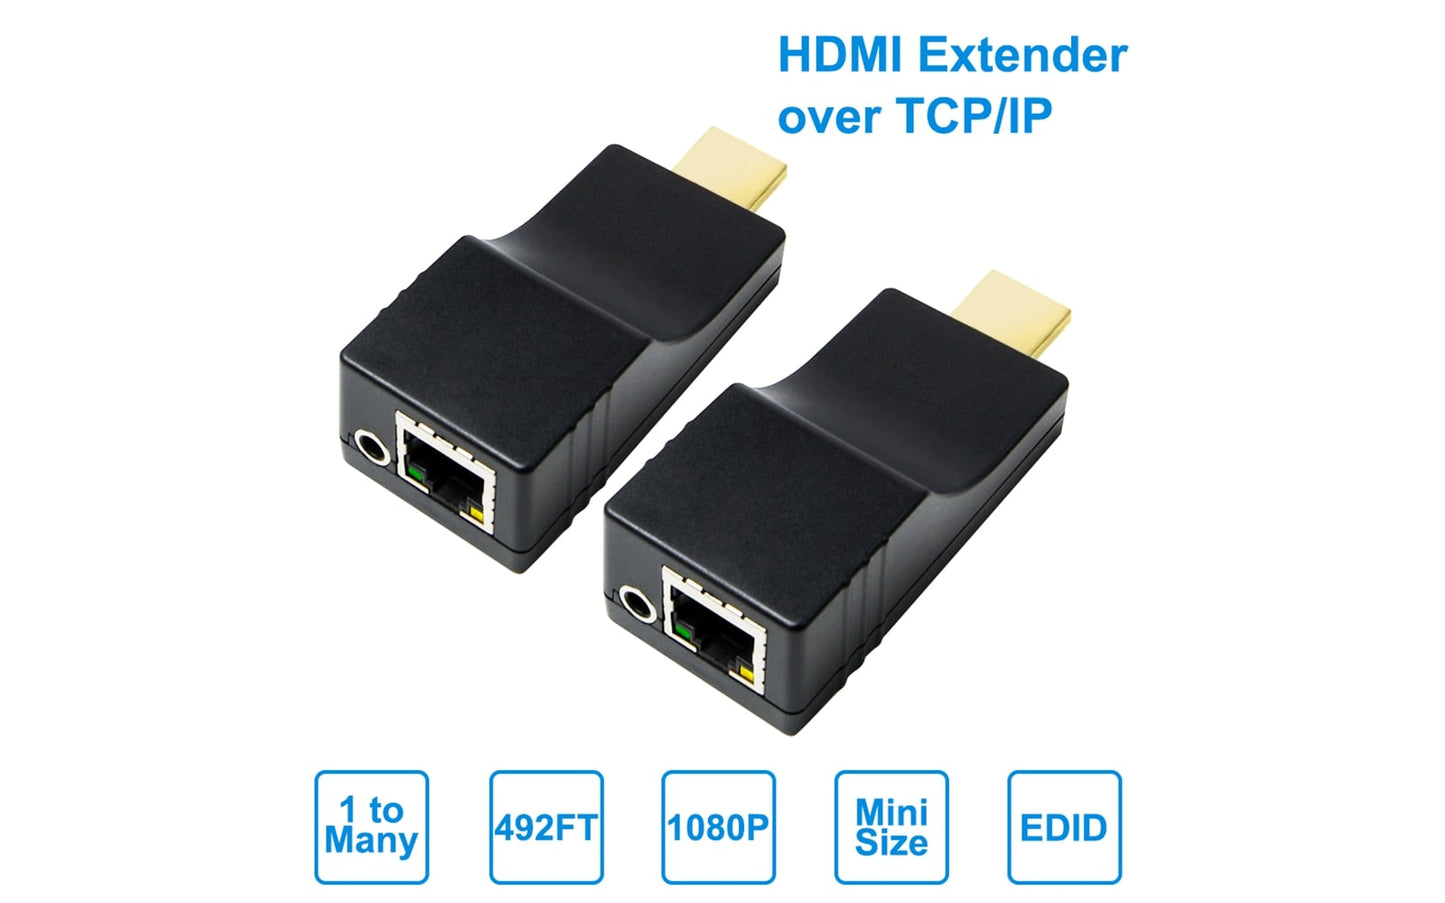 HIP-10 HDMI Extender over IP/TCP